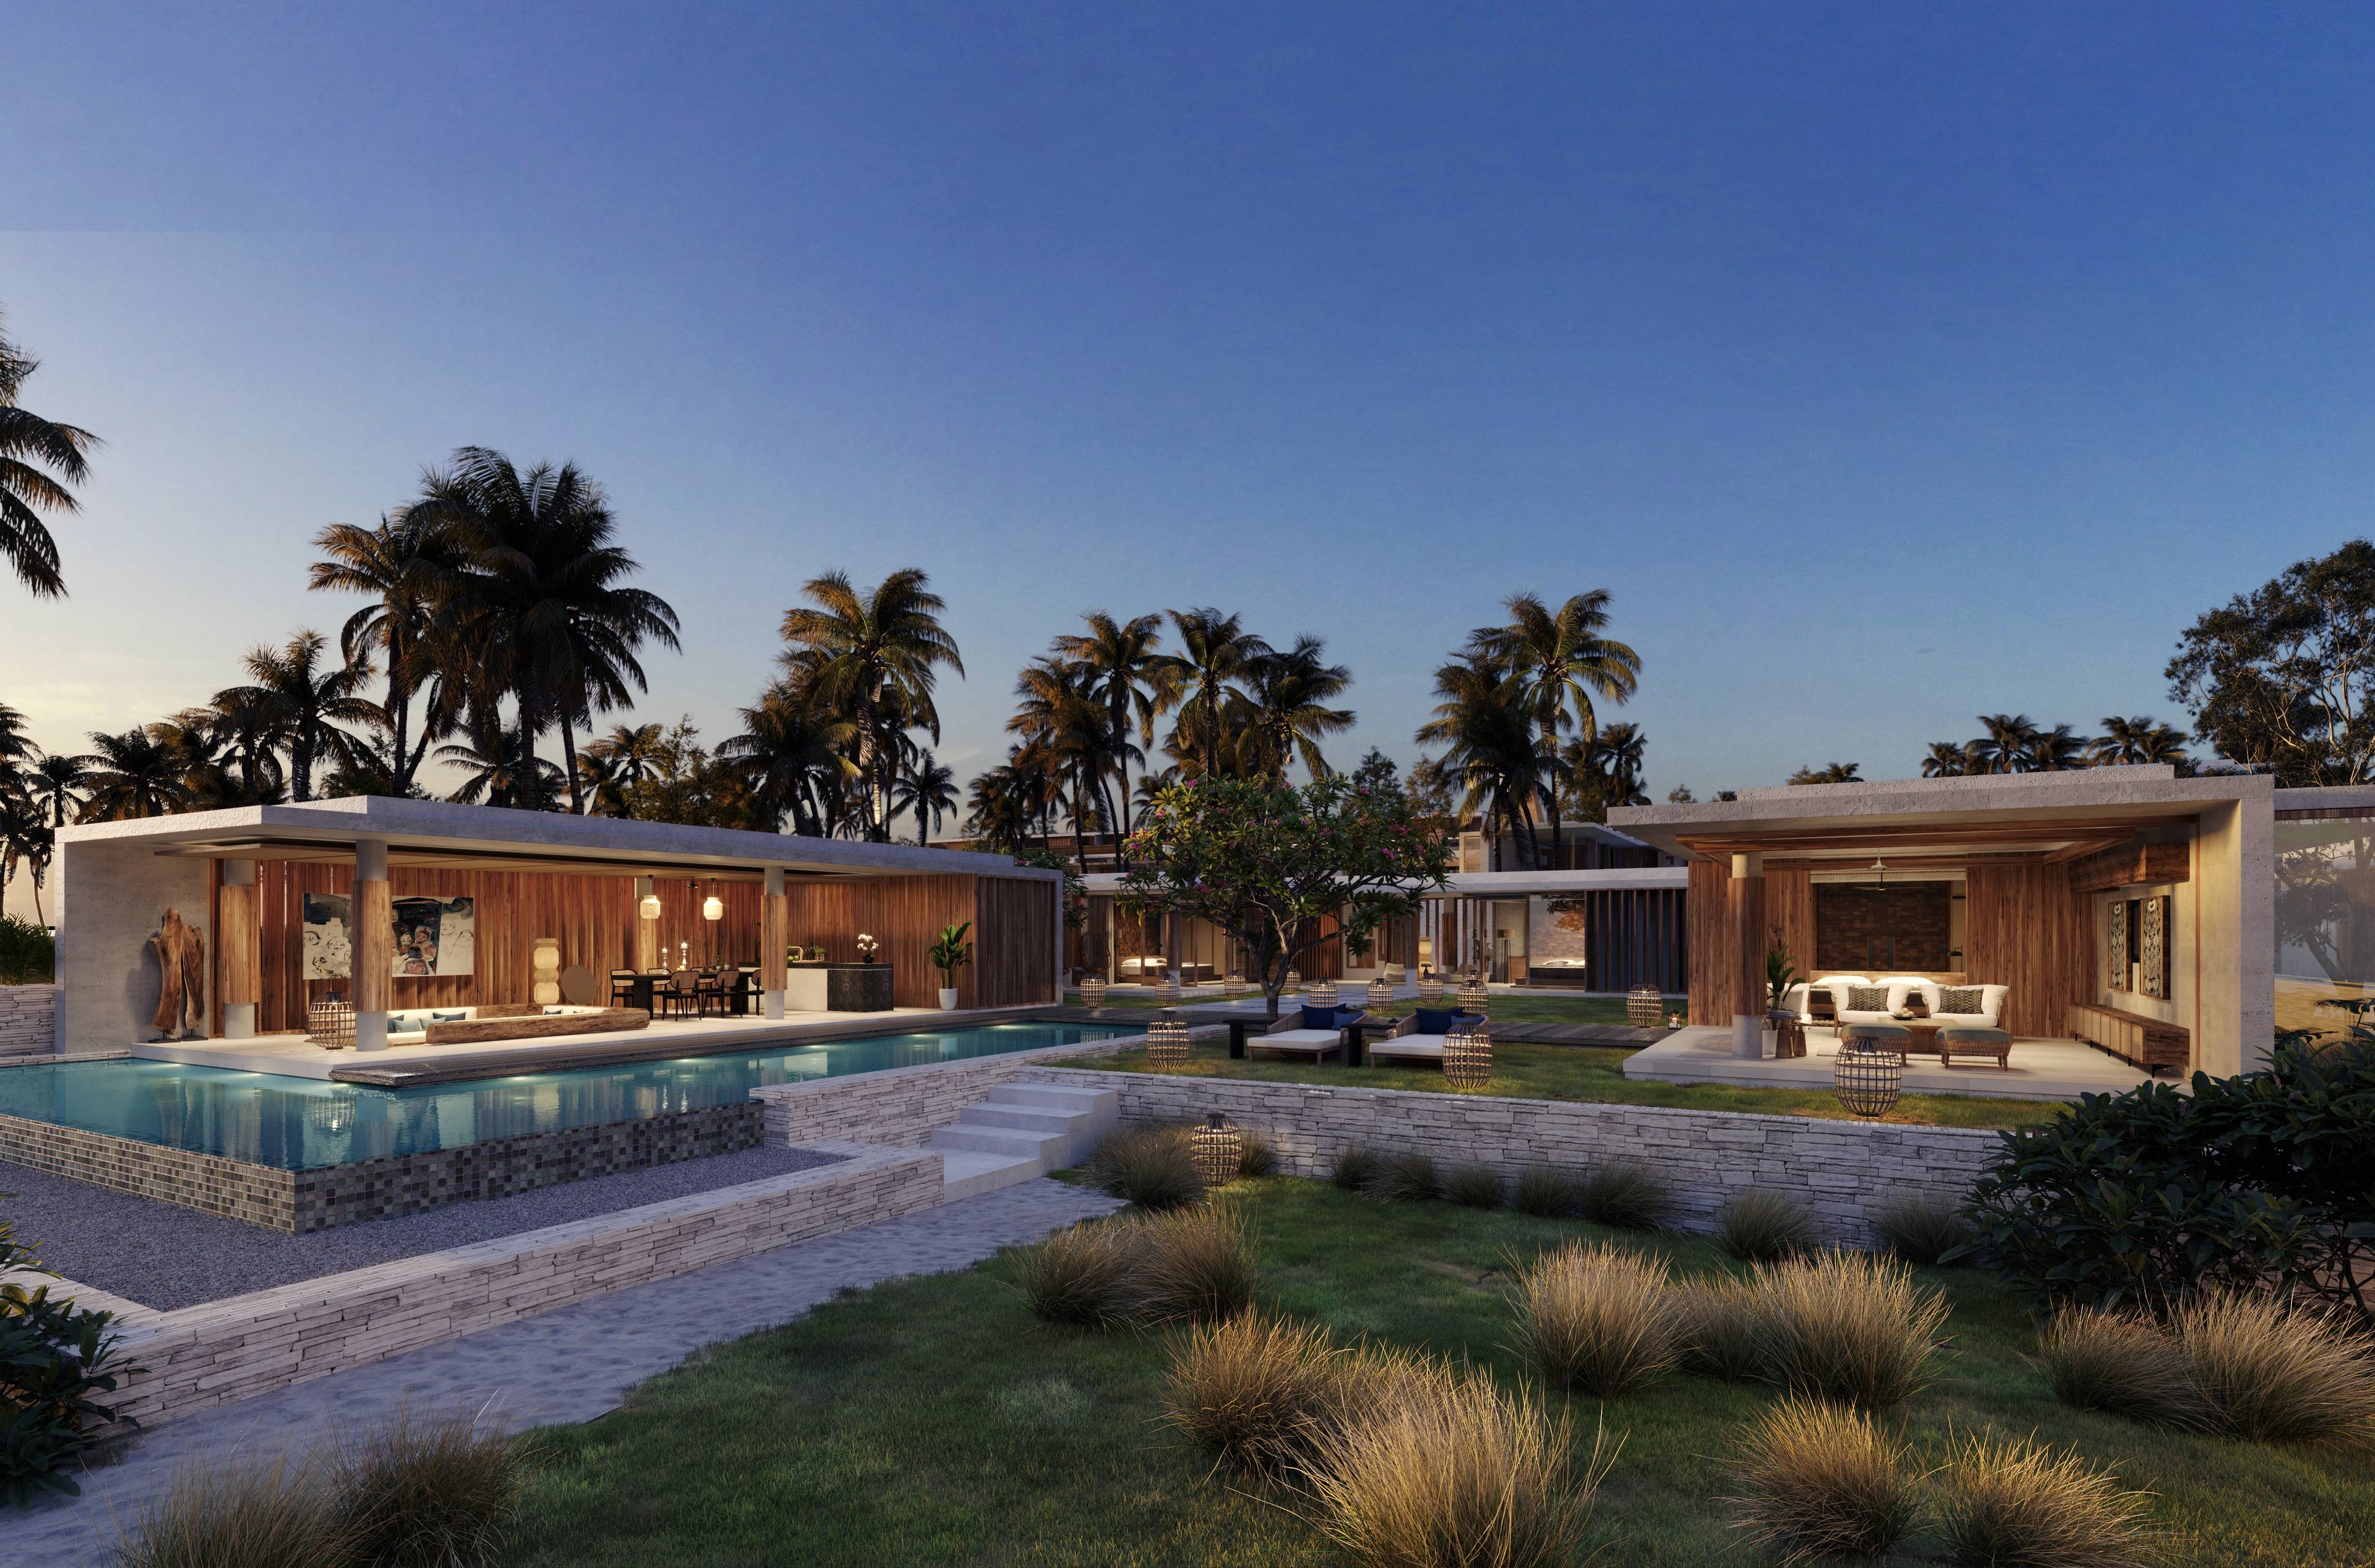 OCEAN-FRONT VILLAS IN A MOST LUXURIOUS & NATURE EMBRACING NEW HOTEL RESORT IN ASIA